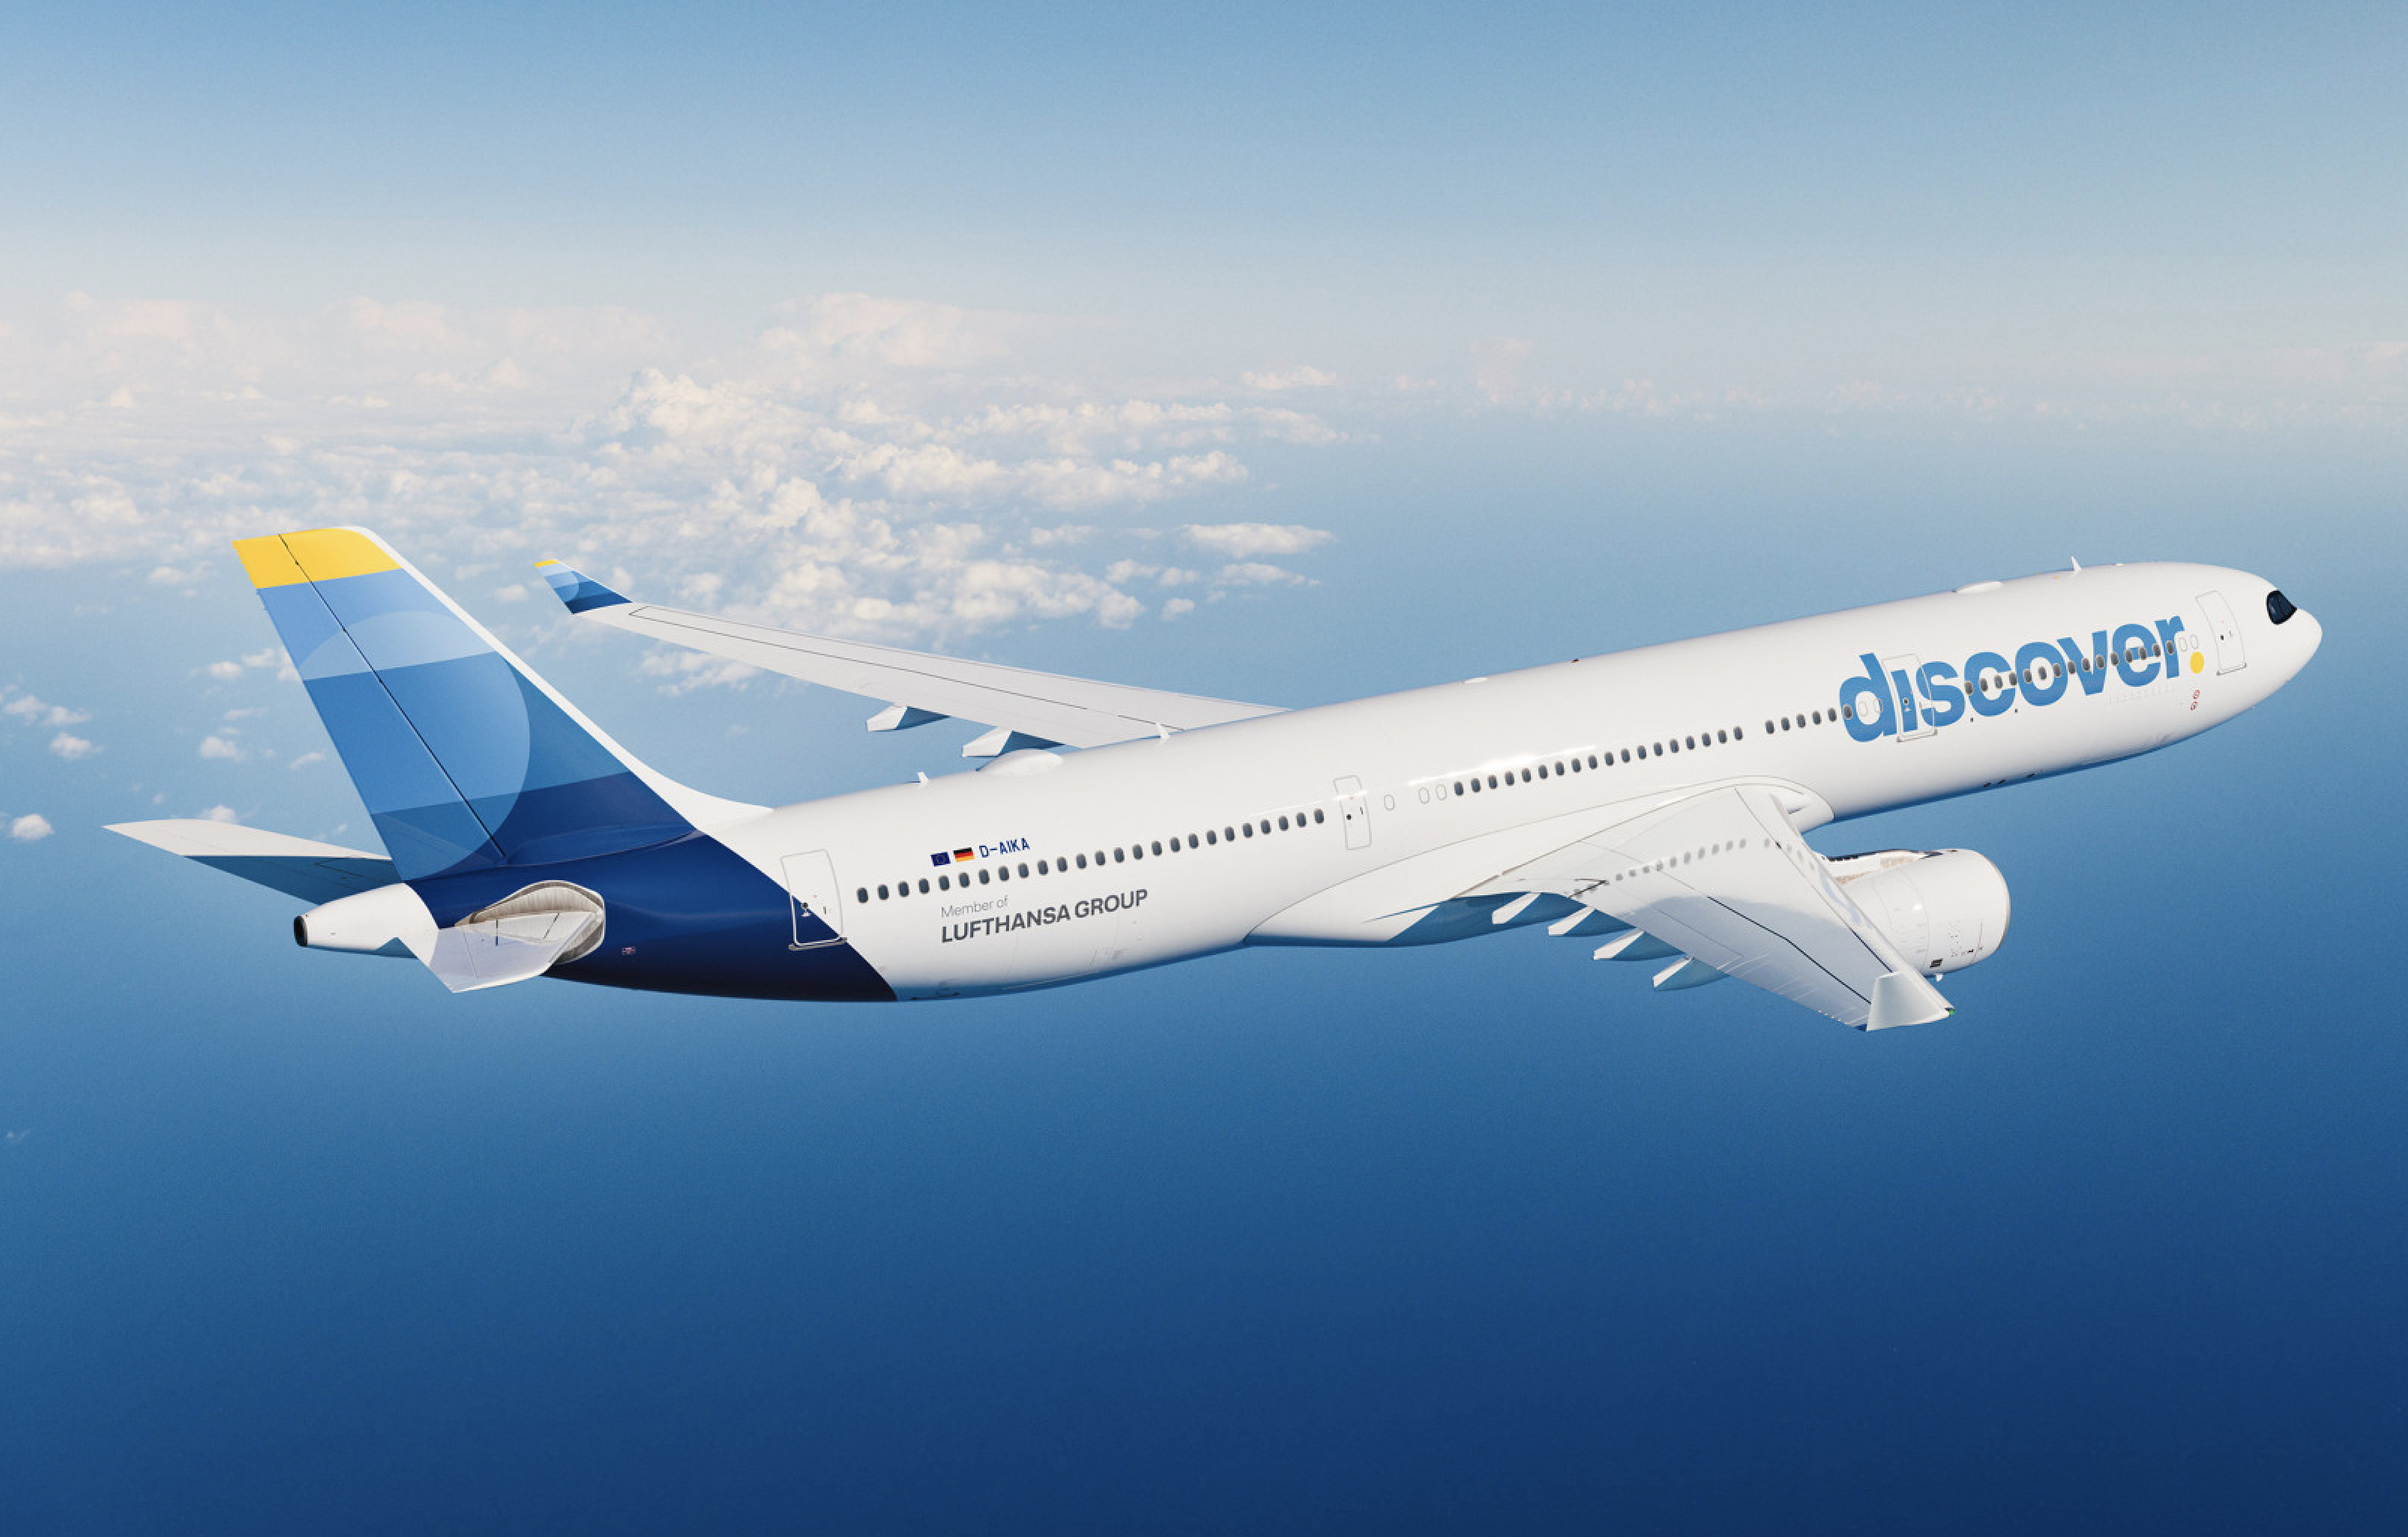 Flights from Tampa to Frankfurt will be daily in 2024 on rebranded Discover  Airlines